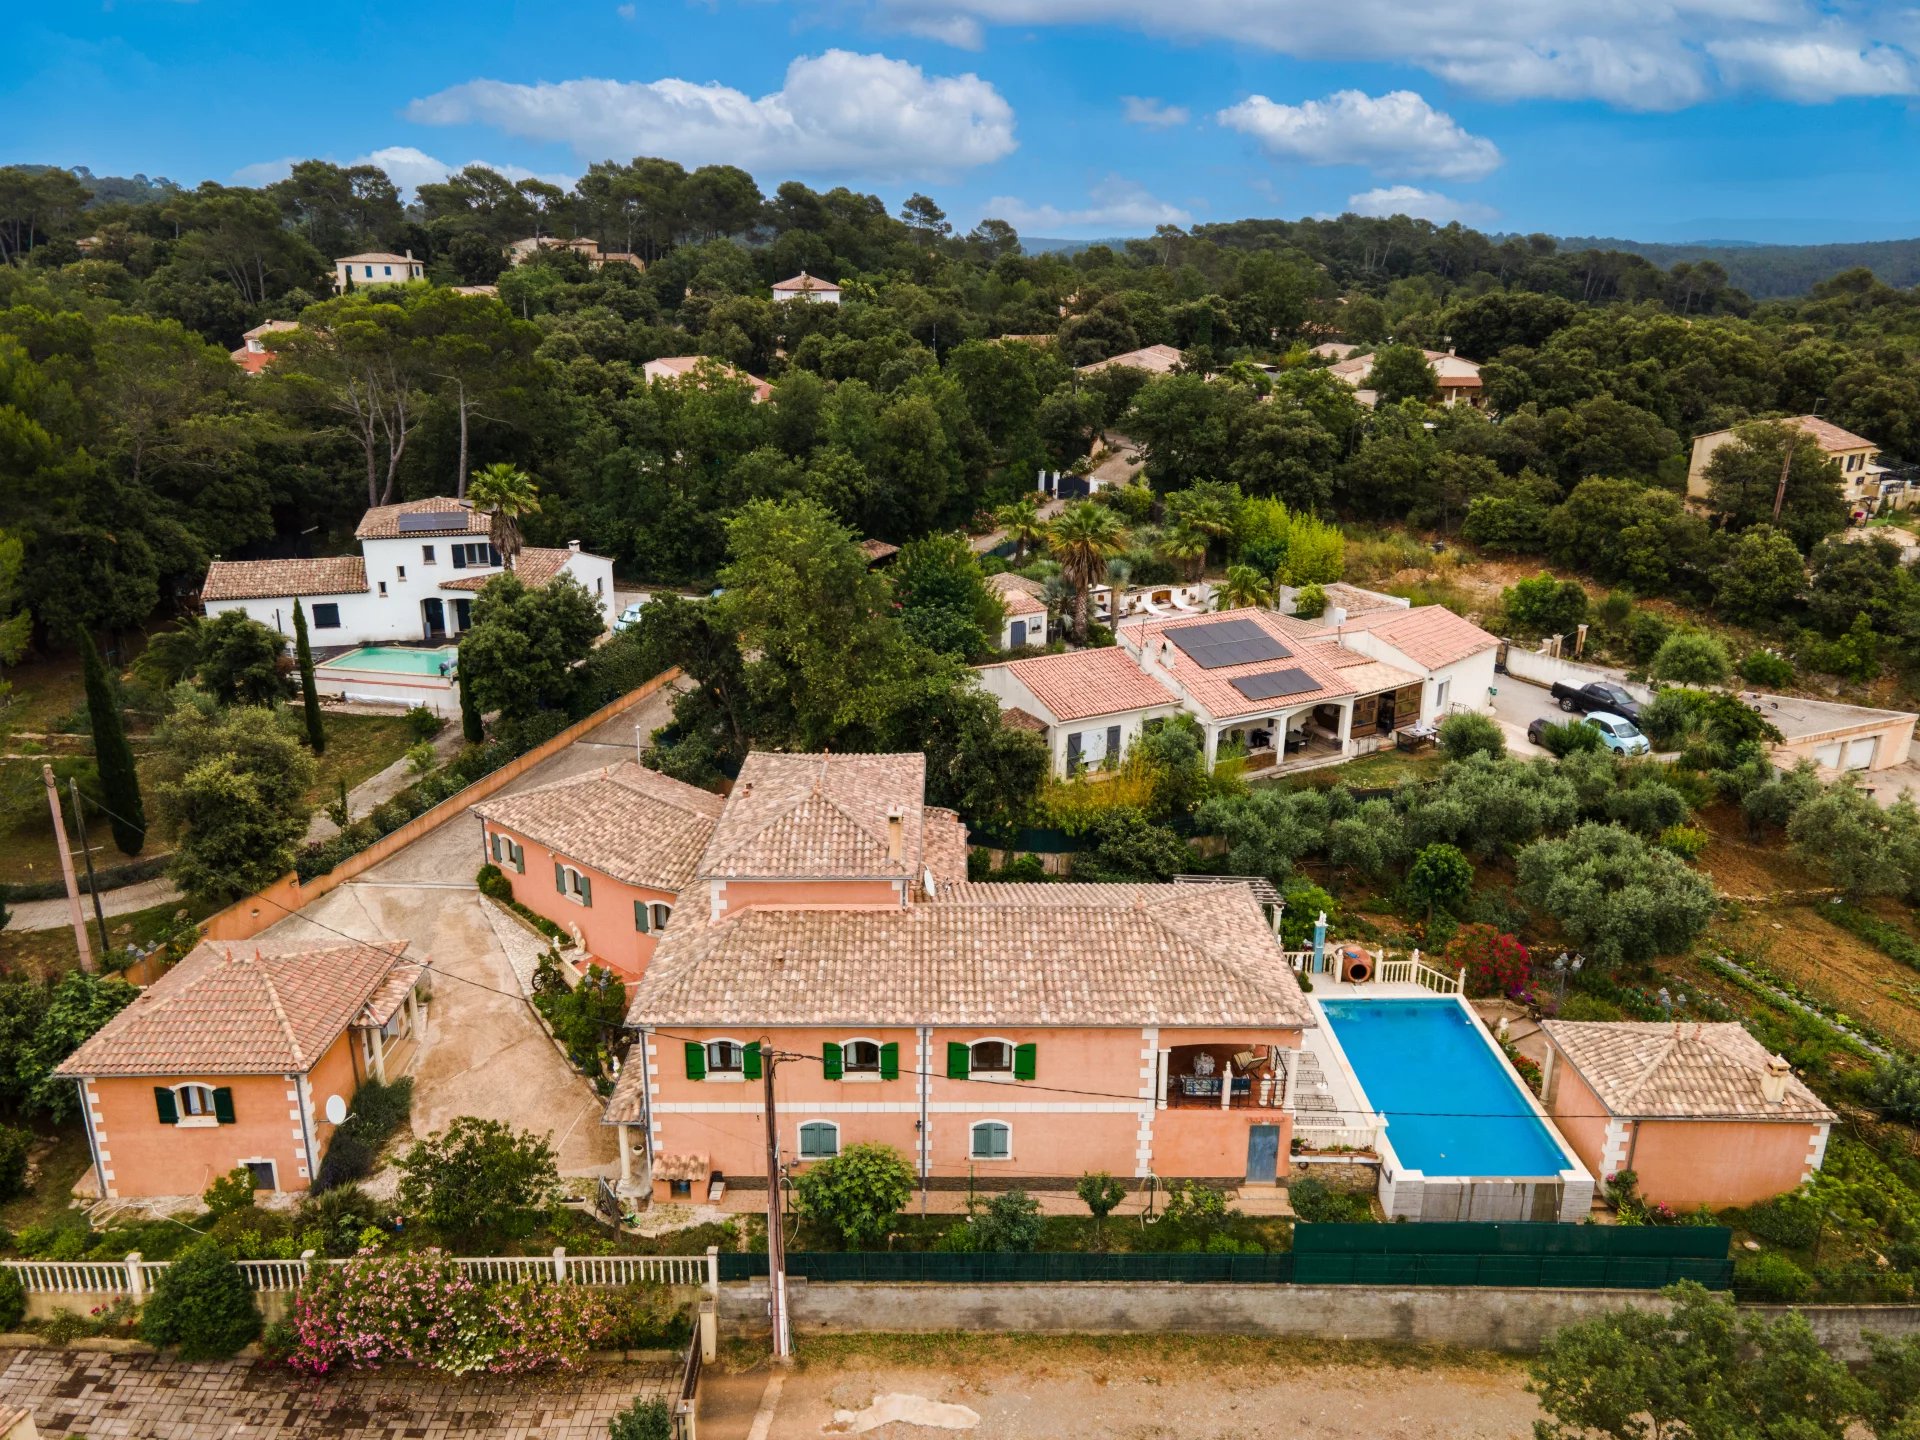 Charming Provençal Residence - Between Countryside and Sea